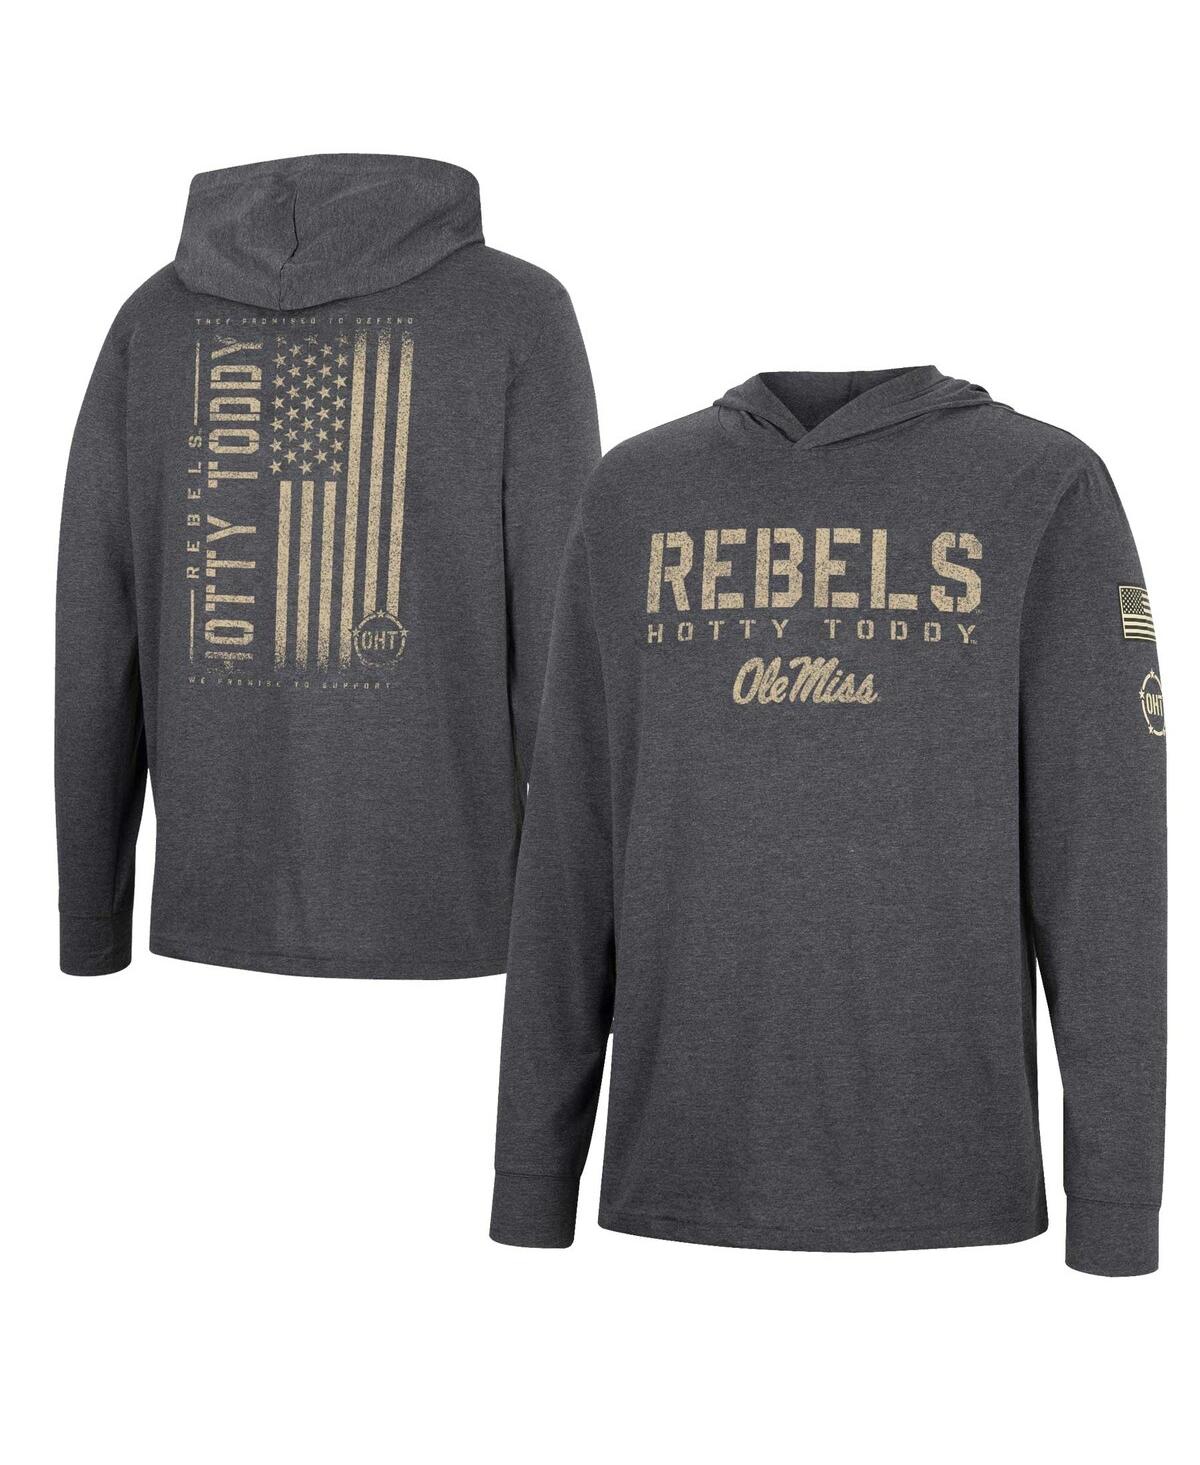 Men's Colosseum Charcoal Ole Miss Rebels Team Oht Military-Inspired Appreciation Hoodie Long Sleeve T-shirt - Charcoal